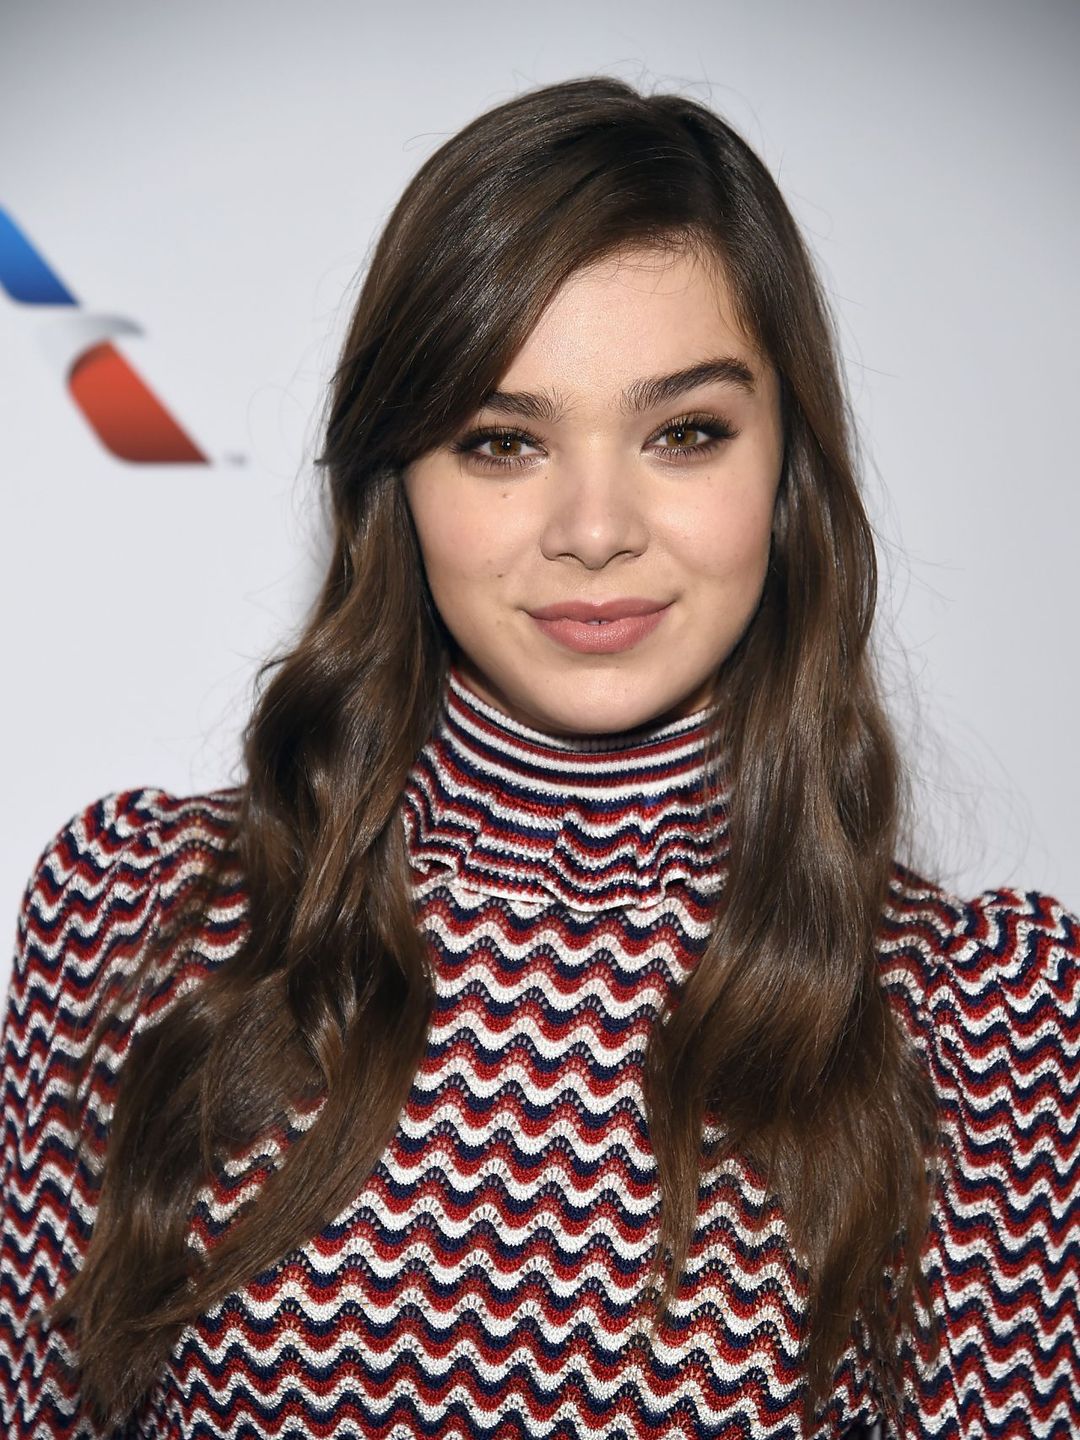 Hailee Steinfeld does she have a husband